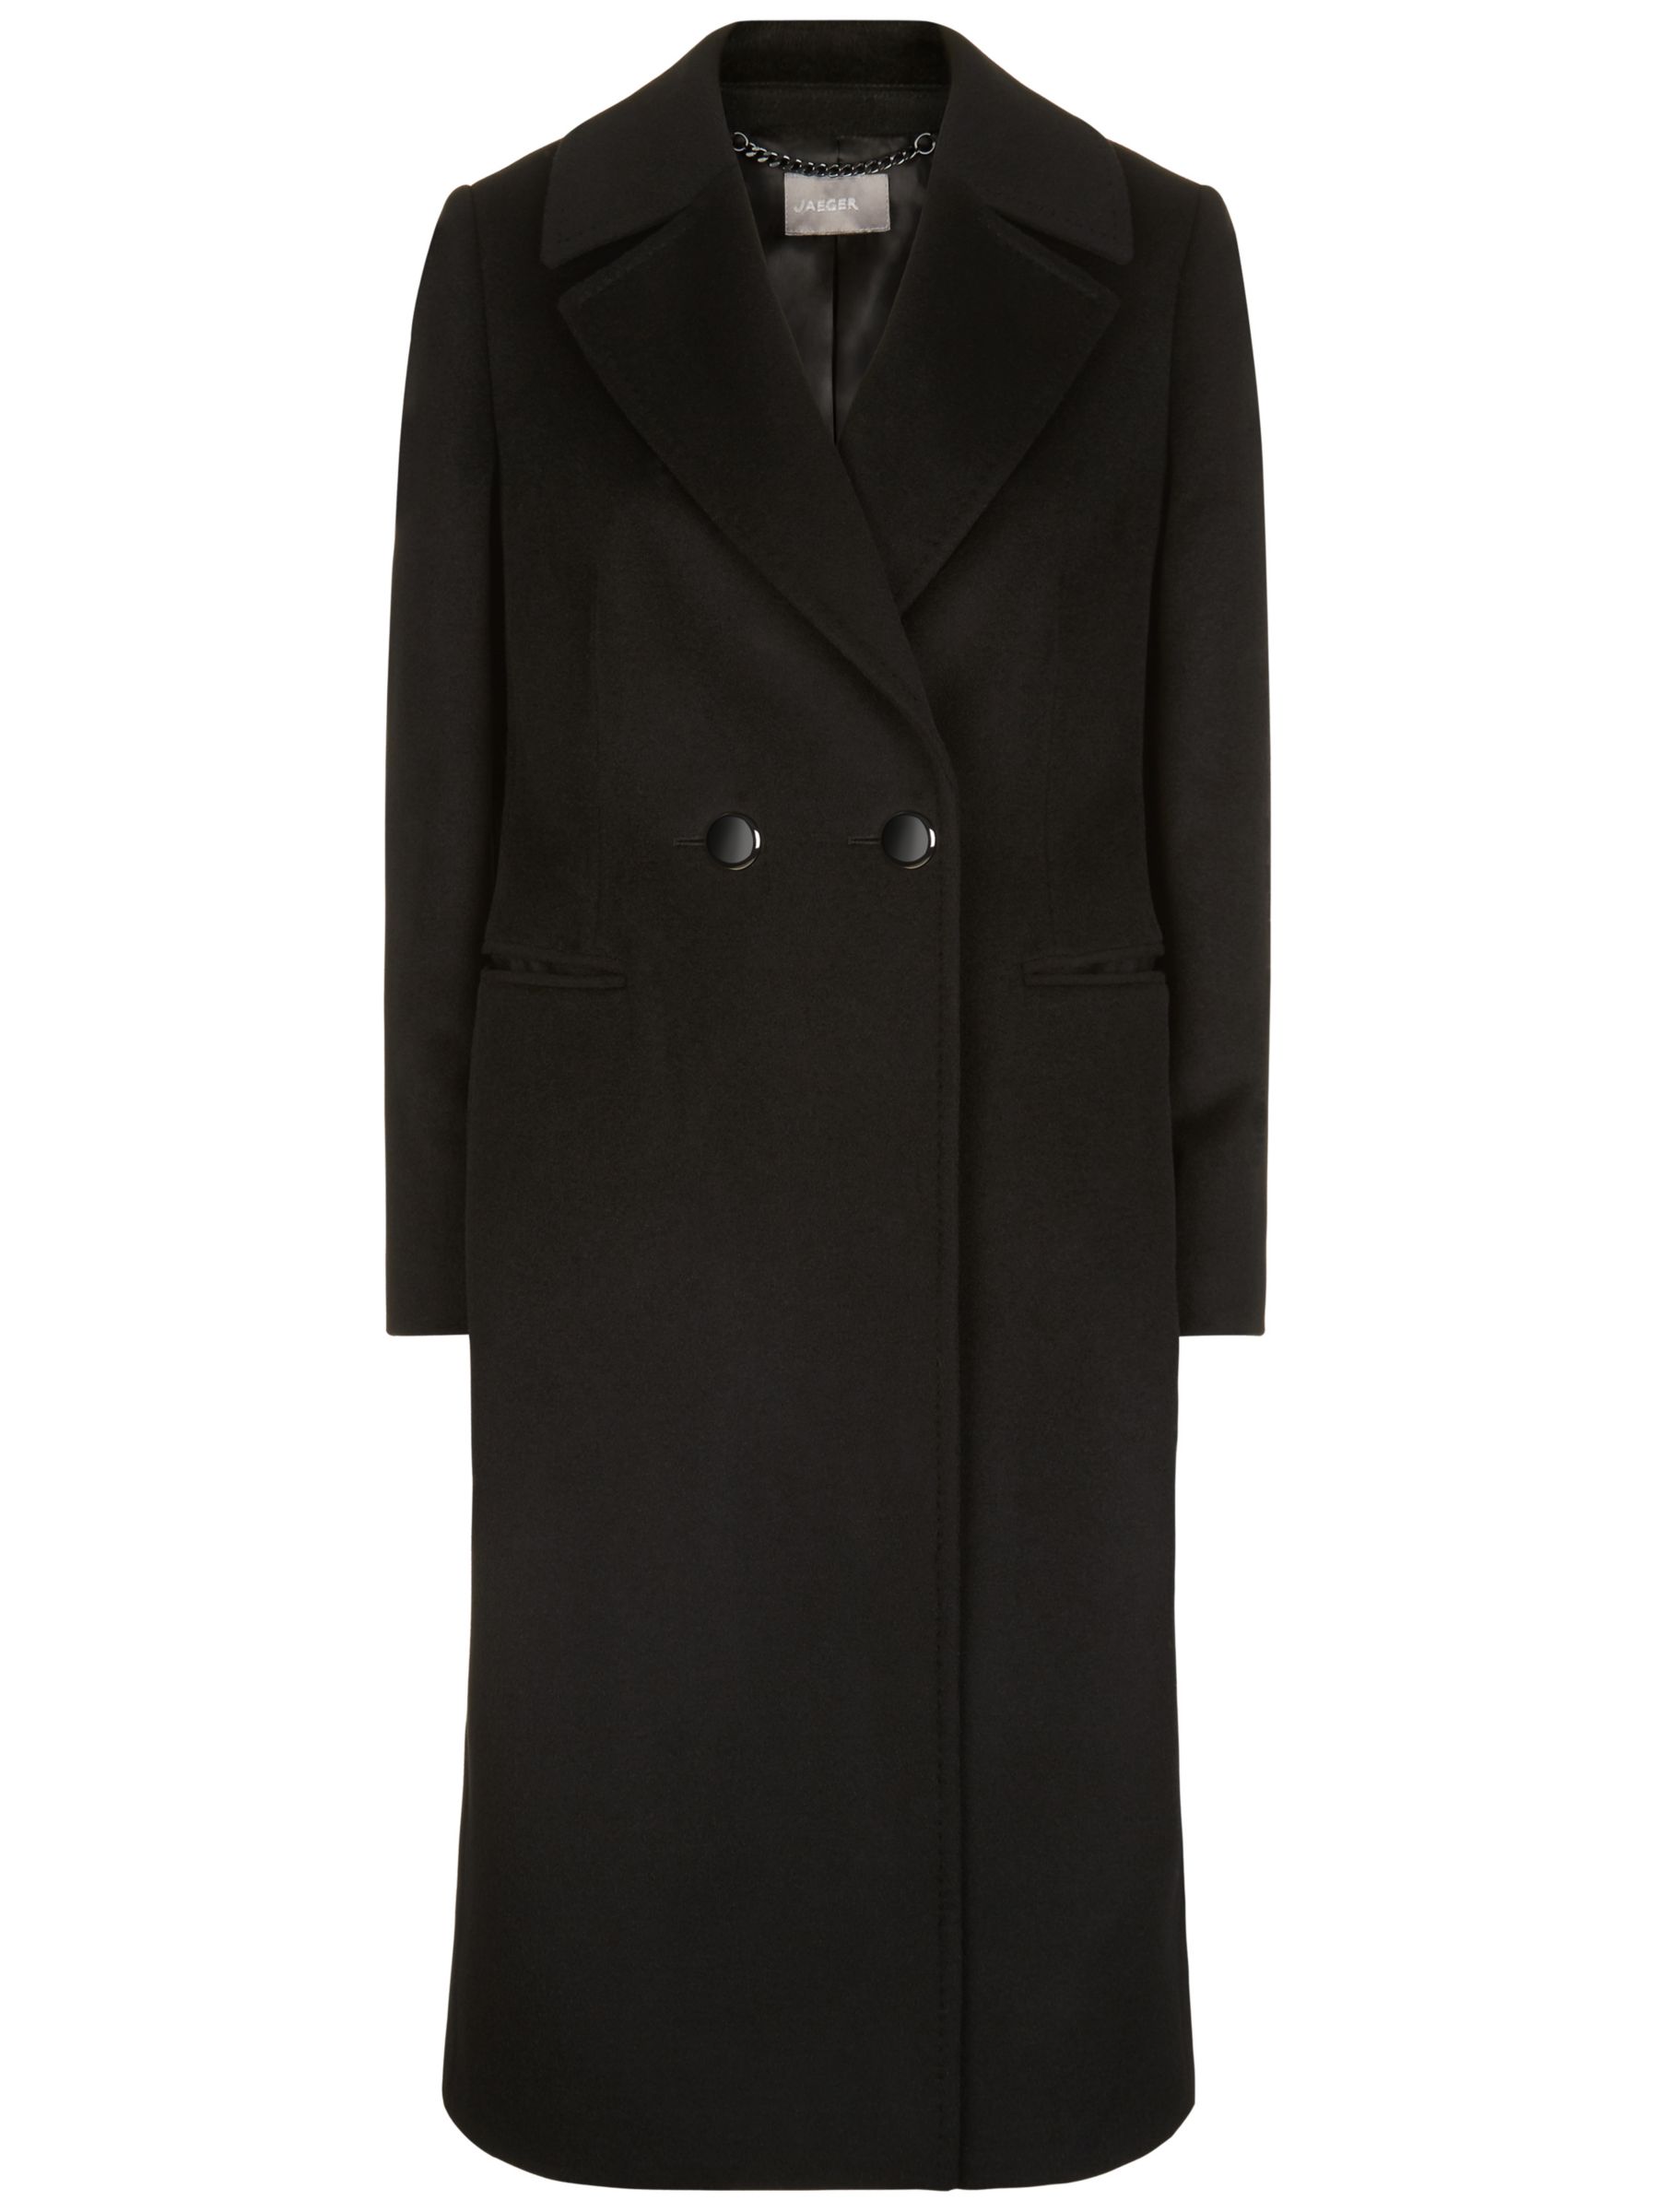 Jaeger Wool Double Breasted Coat, Black at John Lewis & Partners